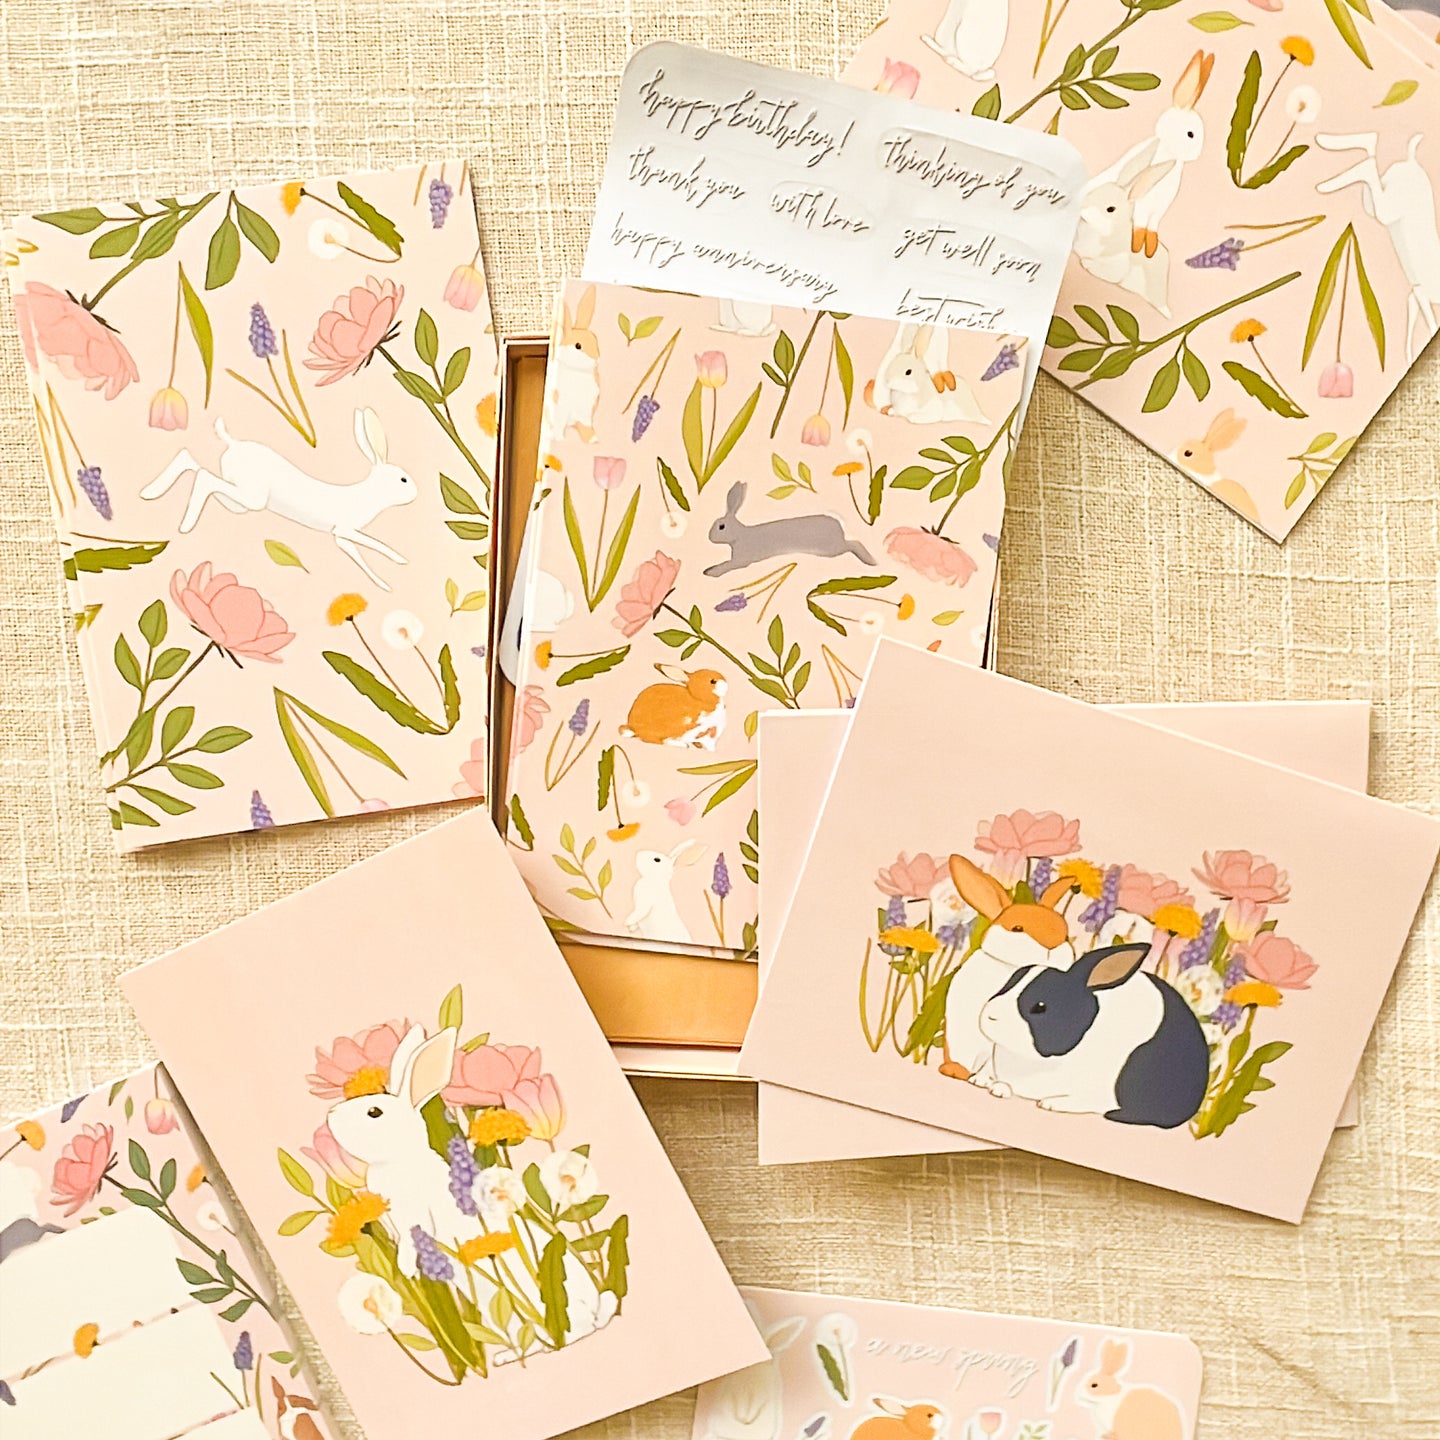 A New Spring Greeting Card Set